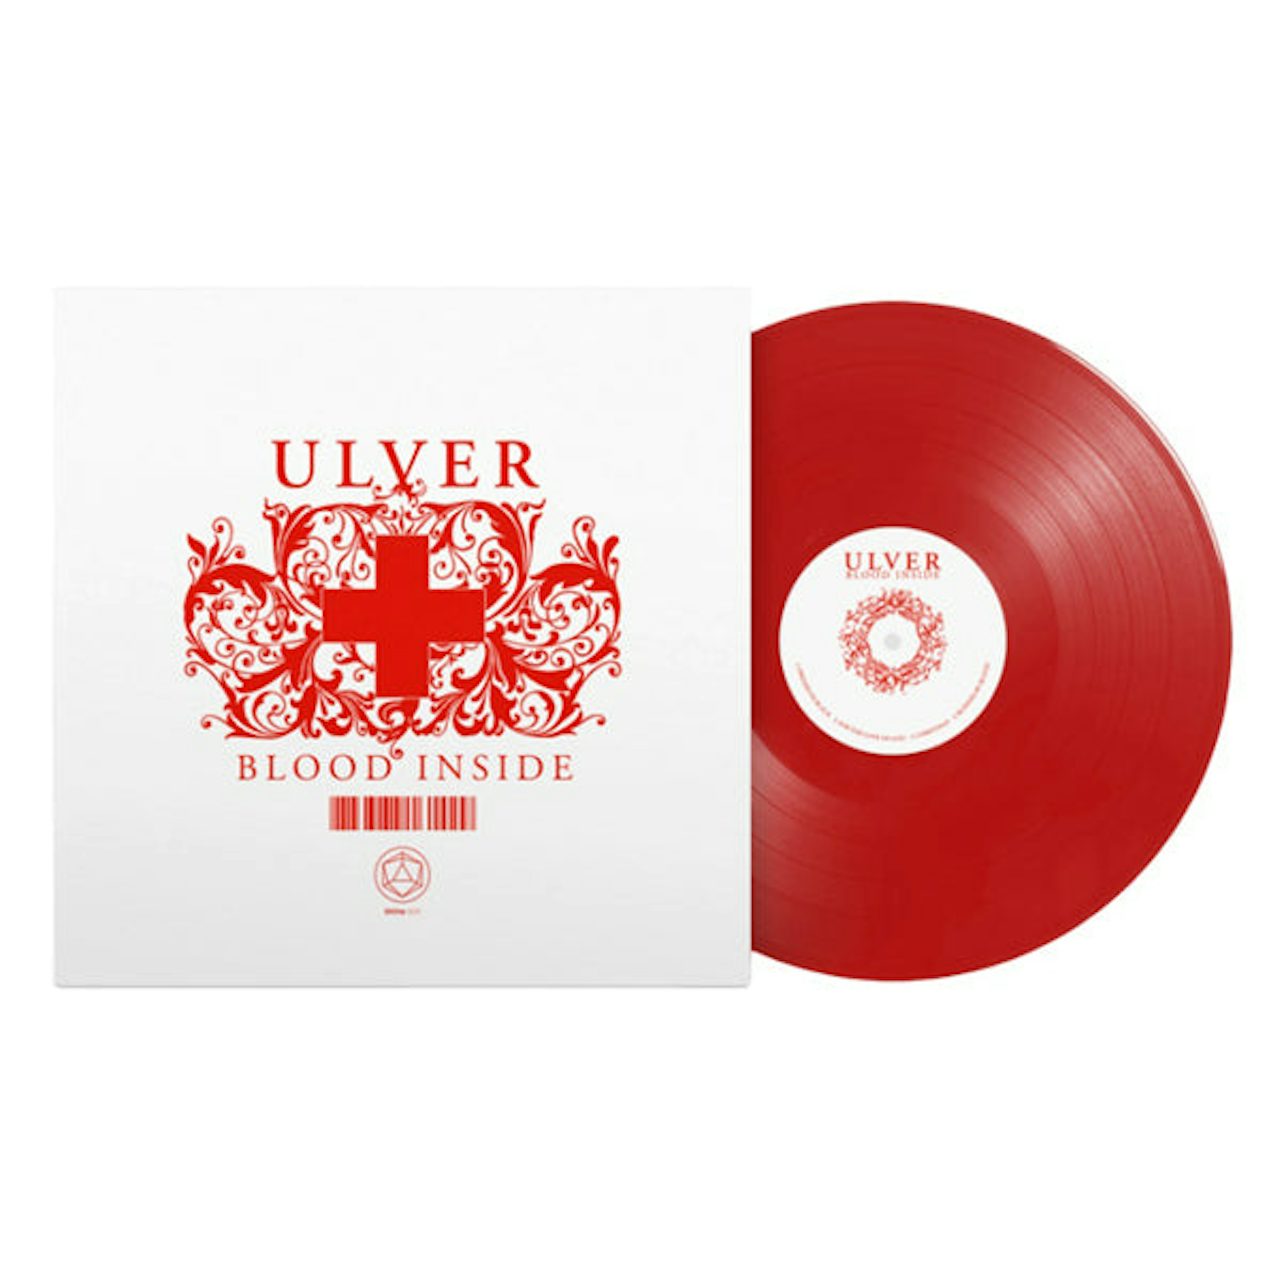 Ulver - Blood Inside (Limited Edition on Red Vinyl)